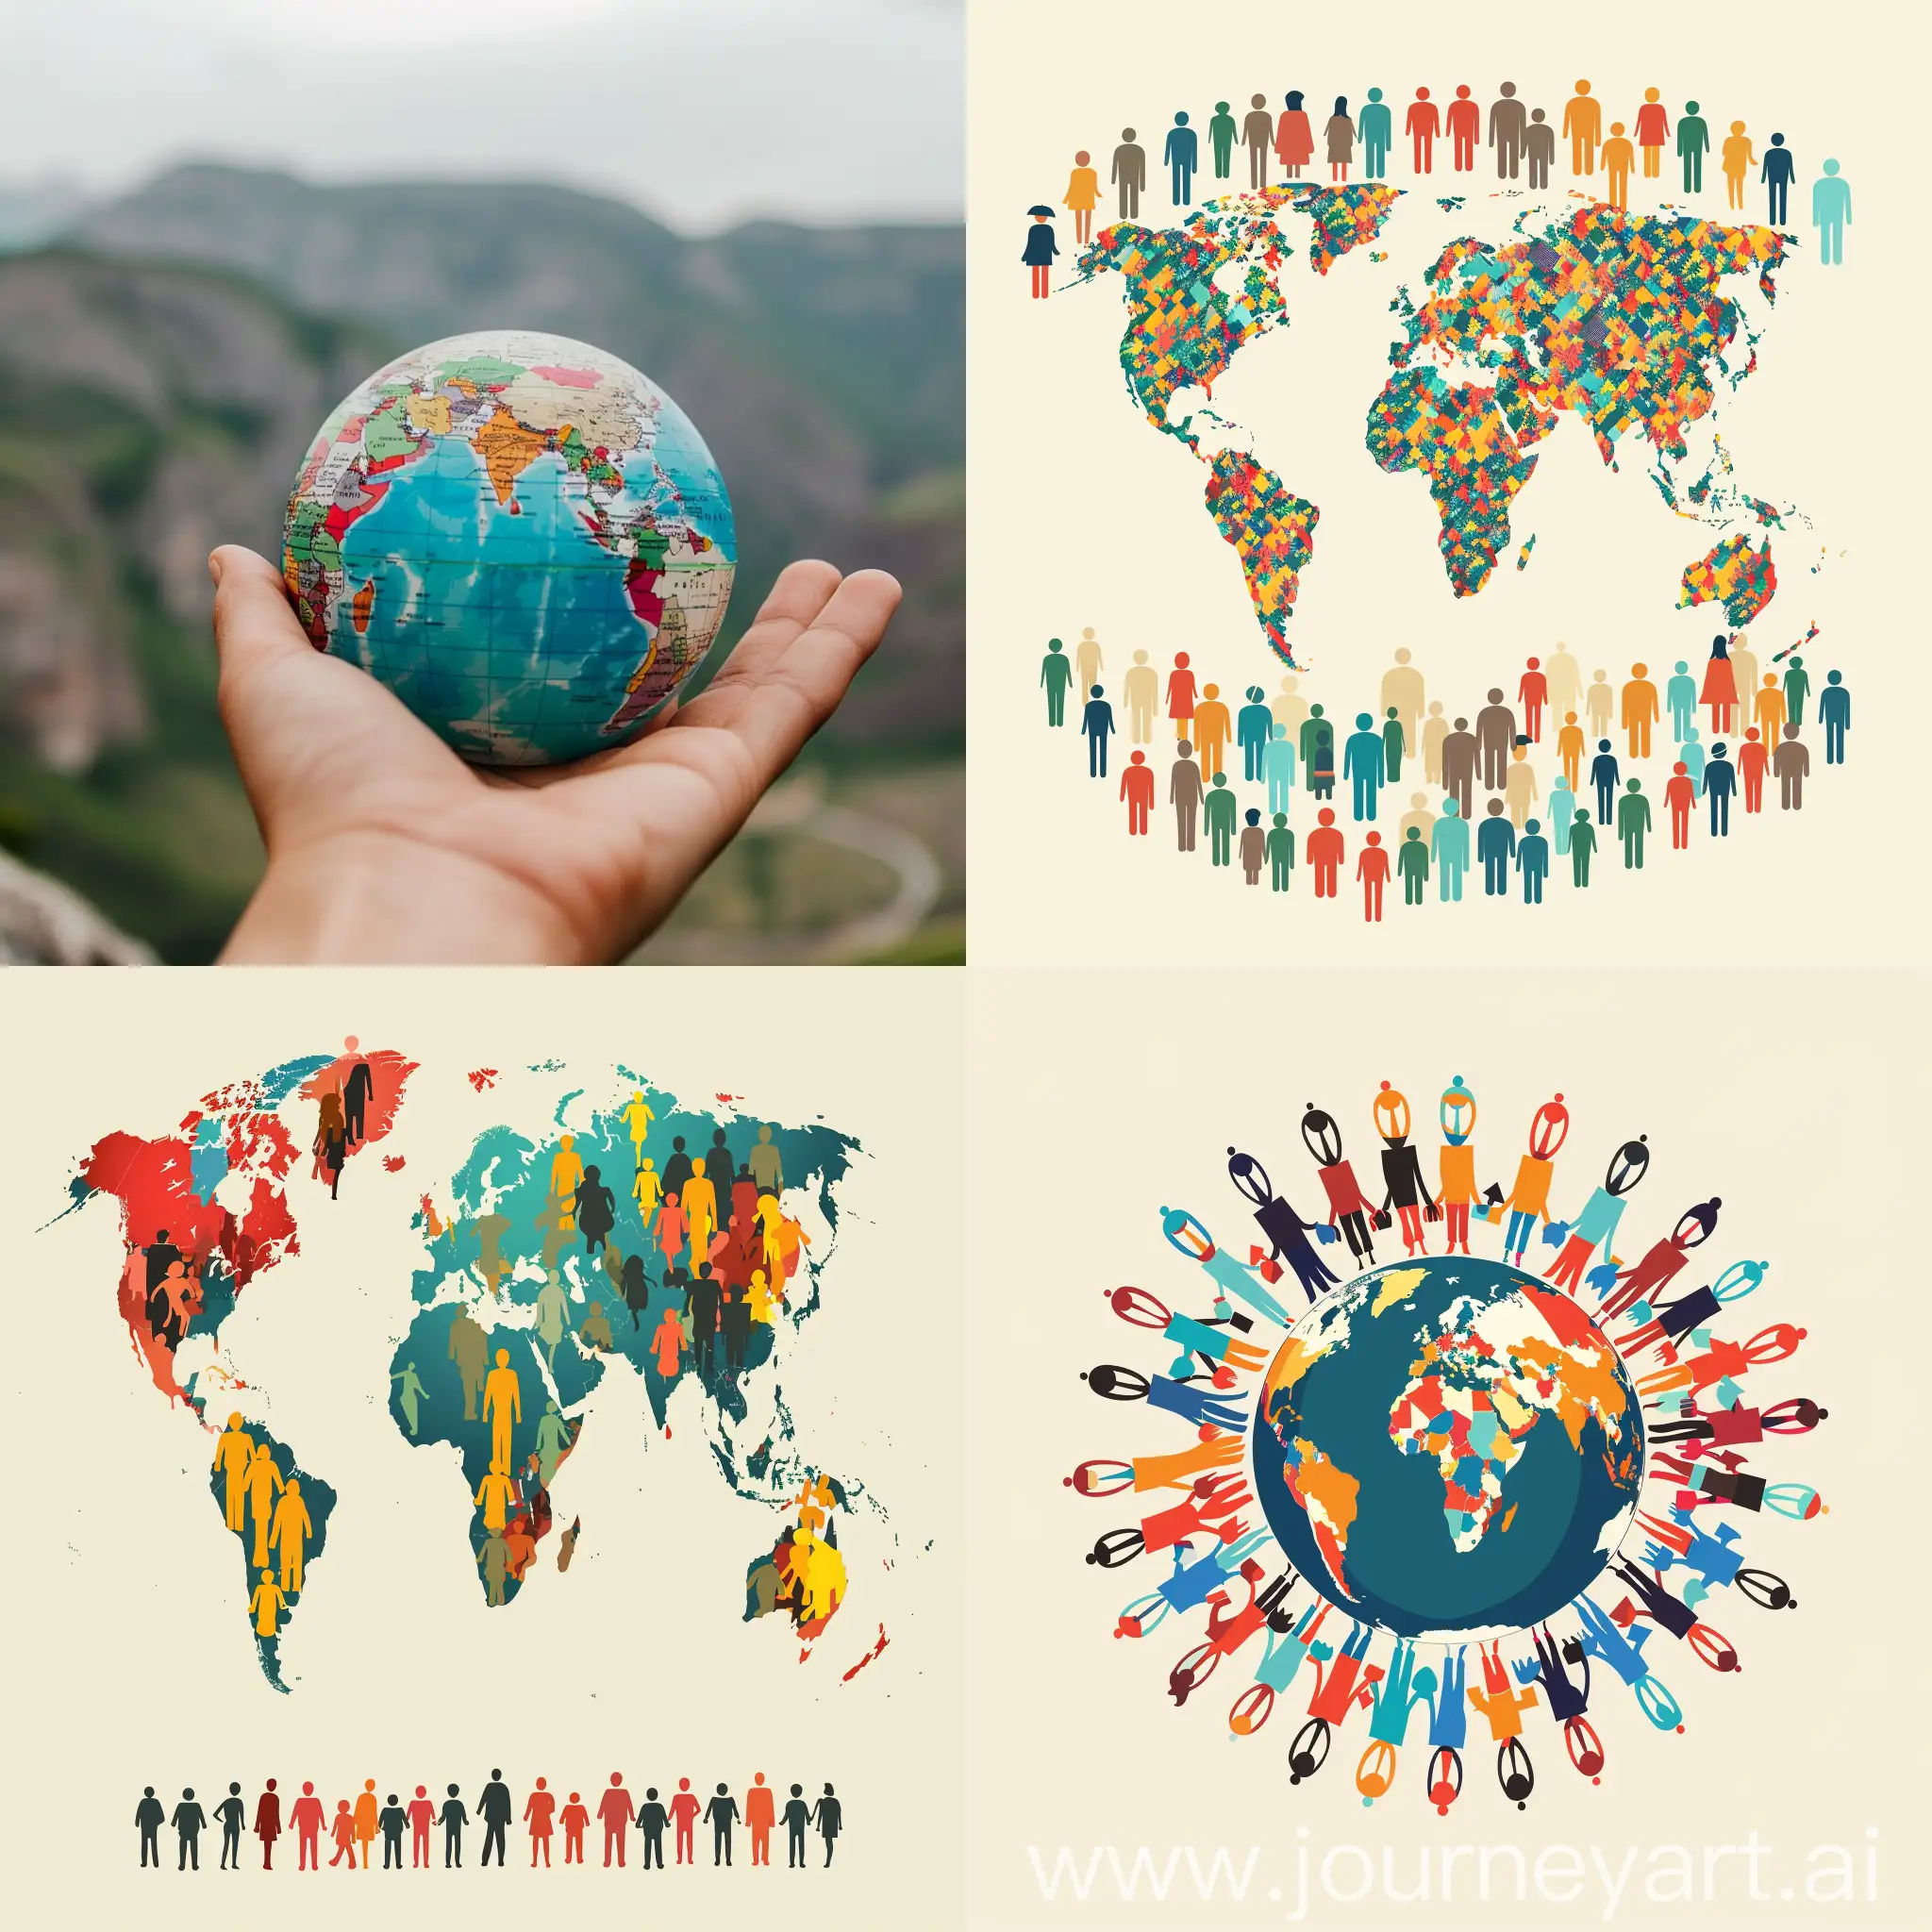 Diverse-Global-Citizens-Uniting-in-Harmony